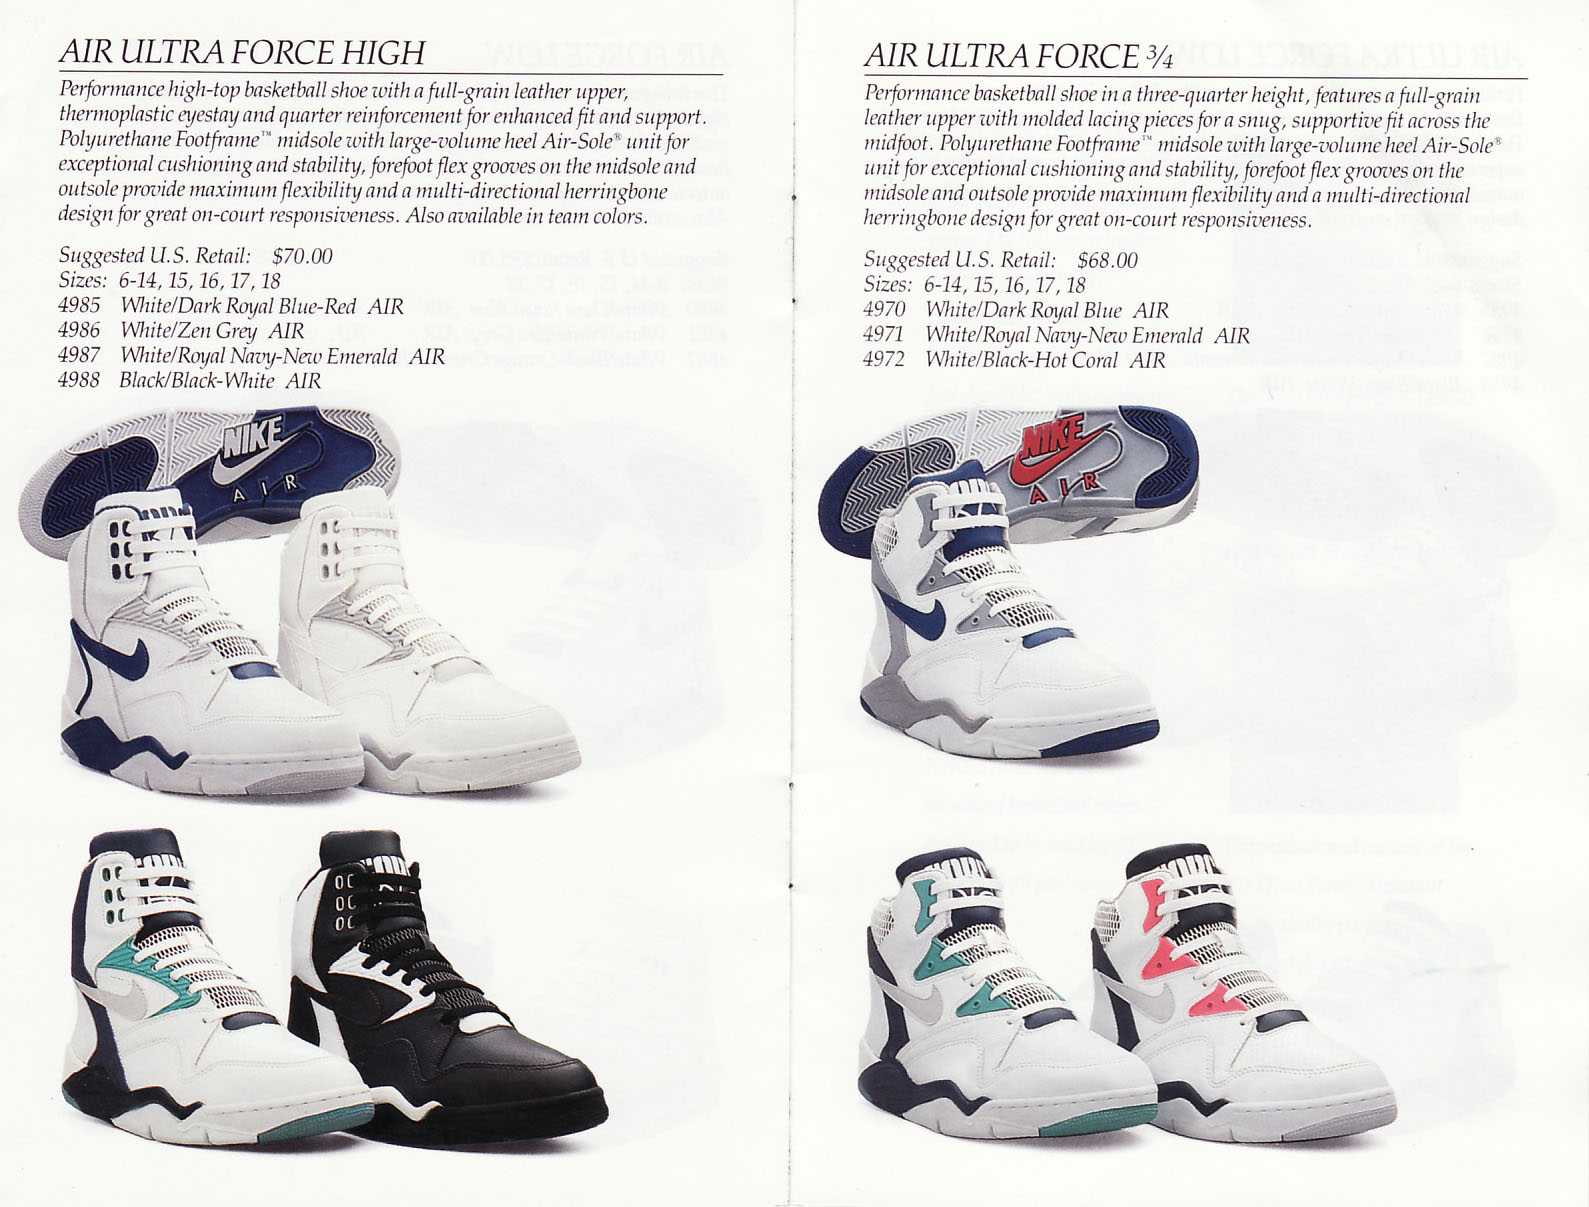 Nike Air Ultra Force High, 3/4, & Low 1990